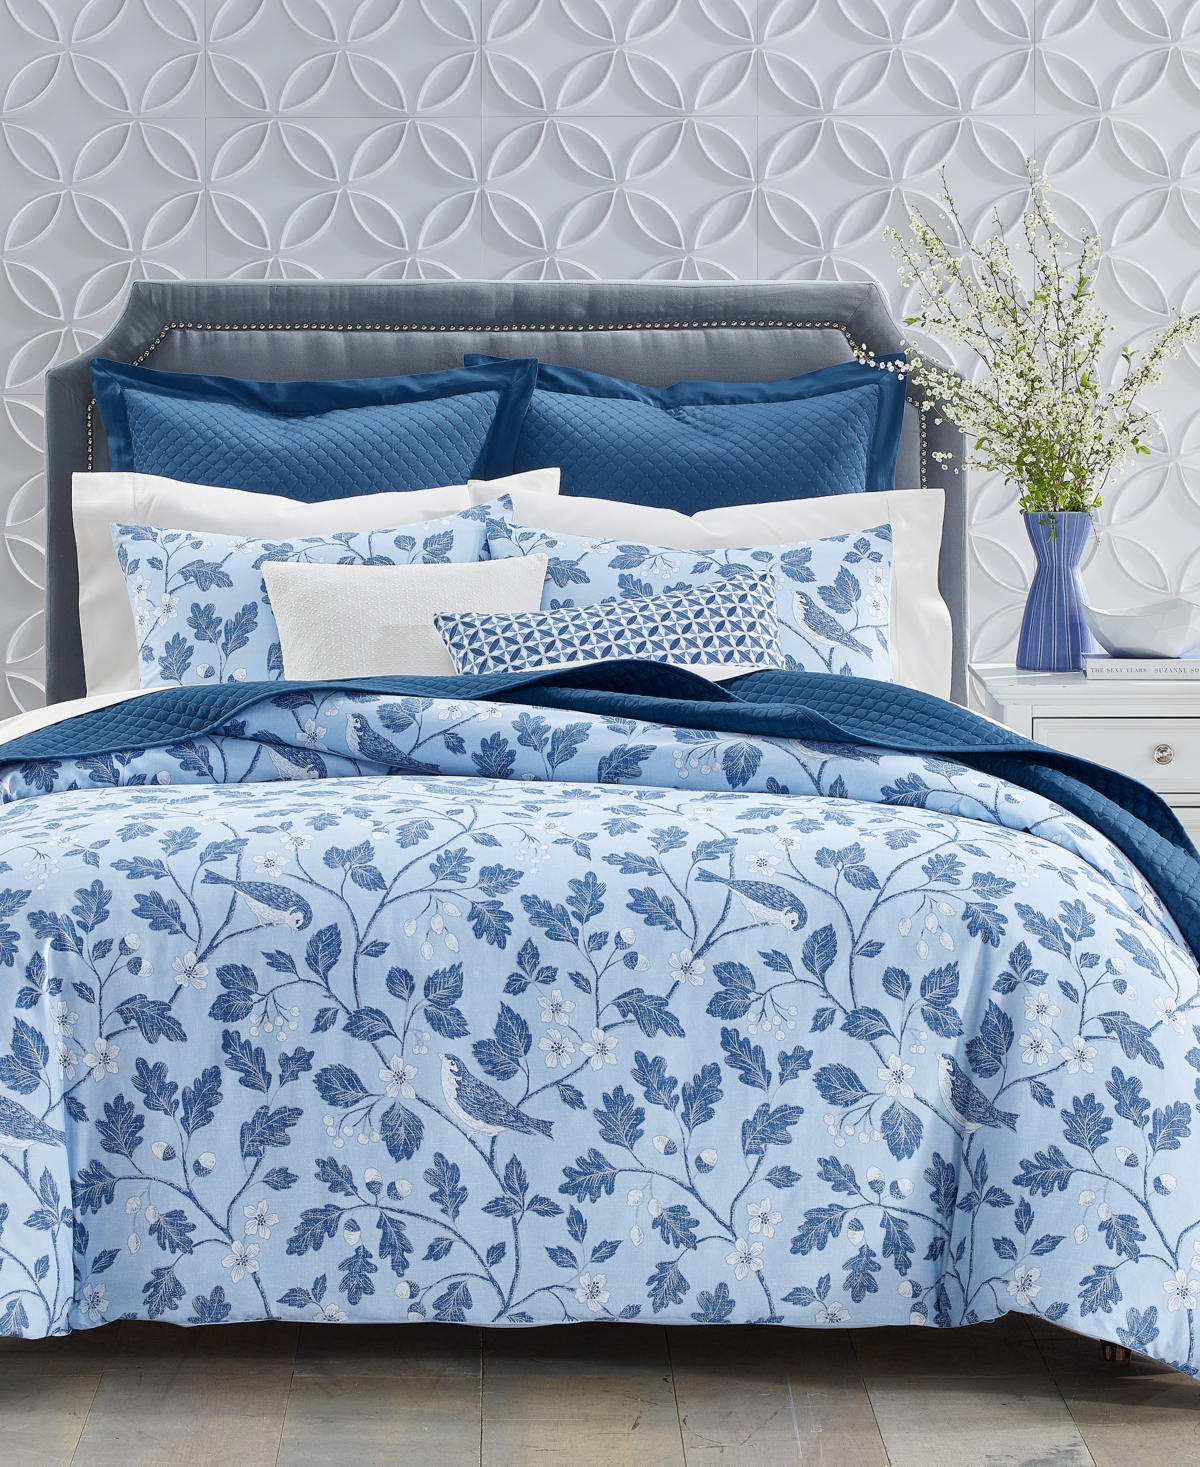 Charter Club Aviary 2-pc. Comforter Set, Twin, Created For Macy's In Blue